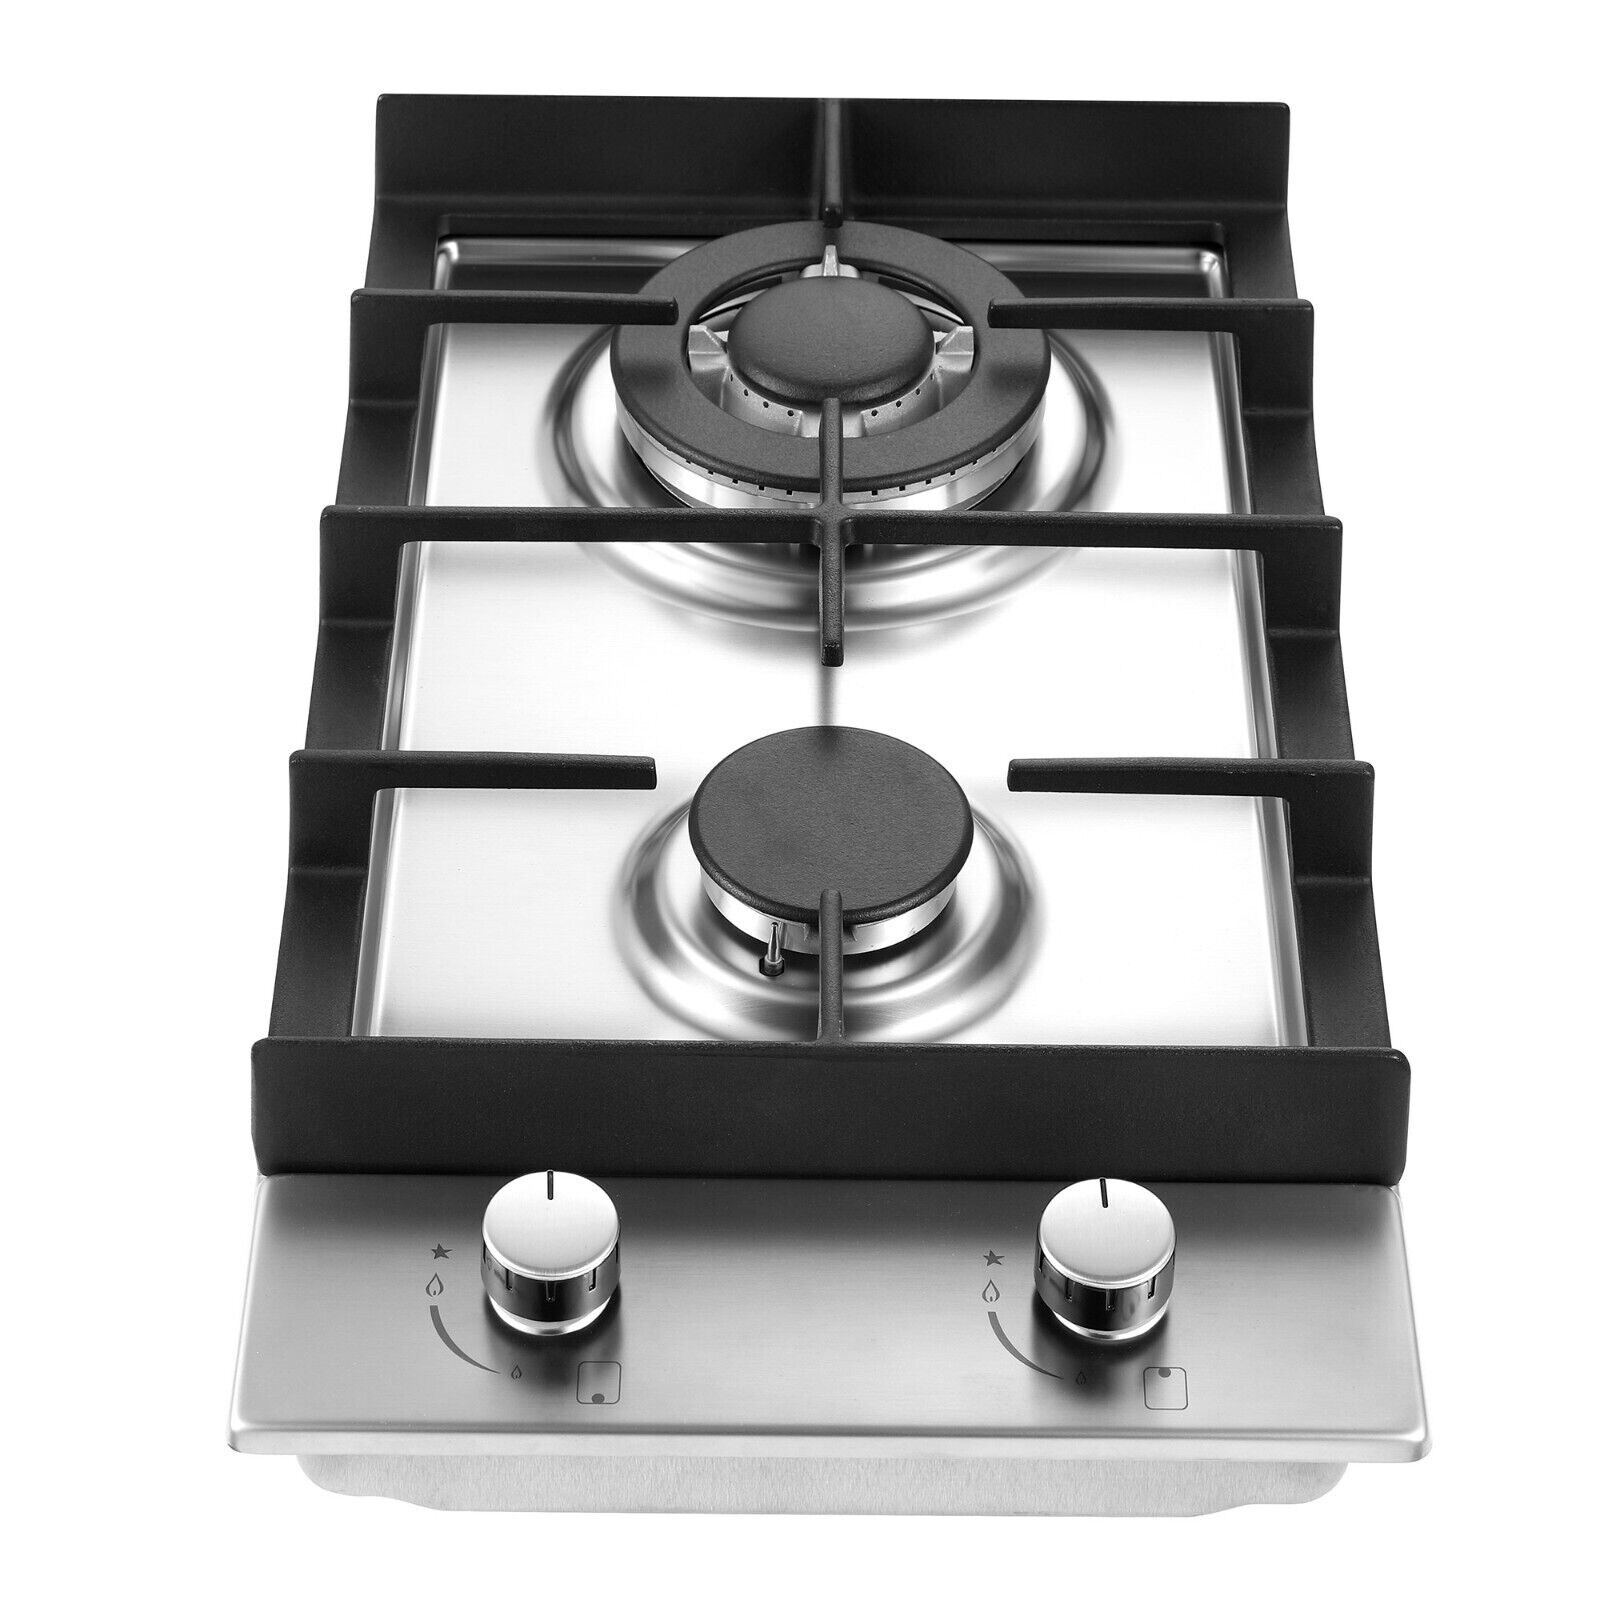 https://ak1.ostkcdn.com/images/products/is/images/direct/185a3997f946706a68da973c8775ed2d3039f8ff/2-Burners-12inch-Gas-Cooktop-Stainless-Steel-NG-LPG-Convertible-Built-in-Burner.jpg